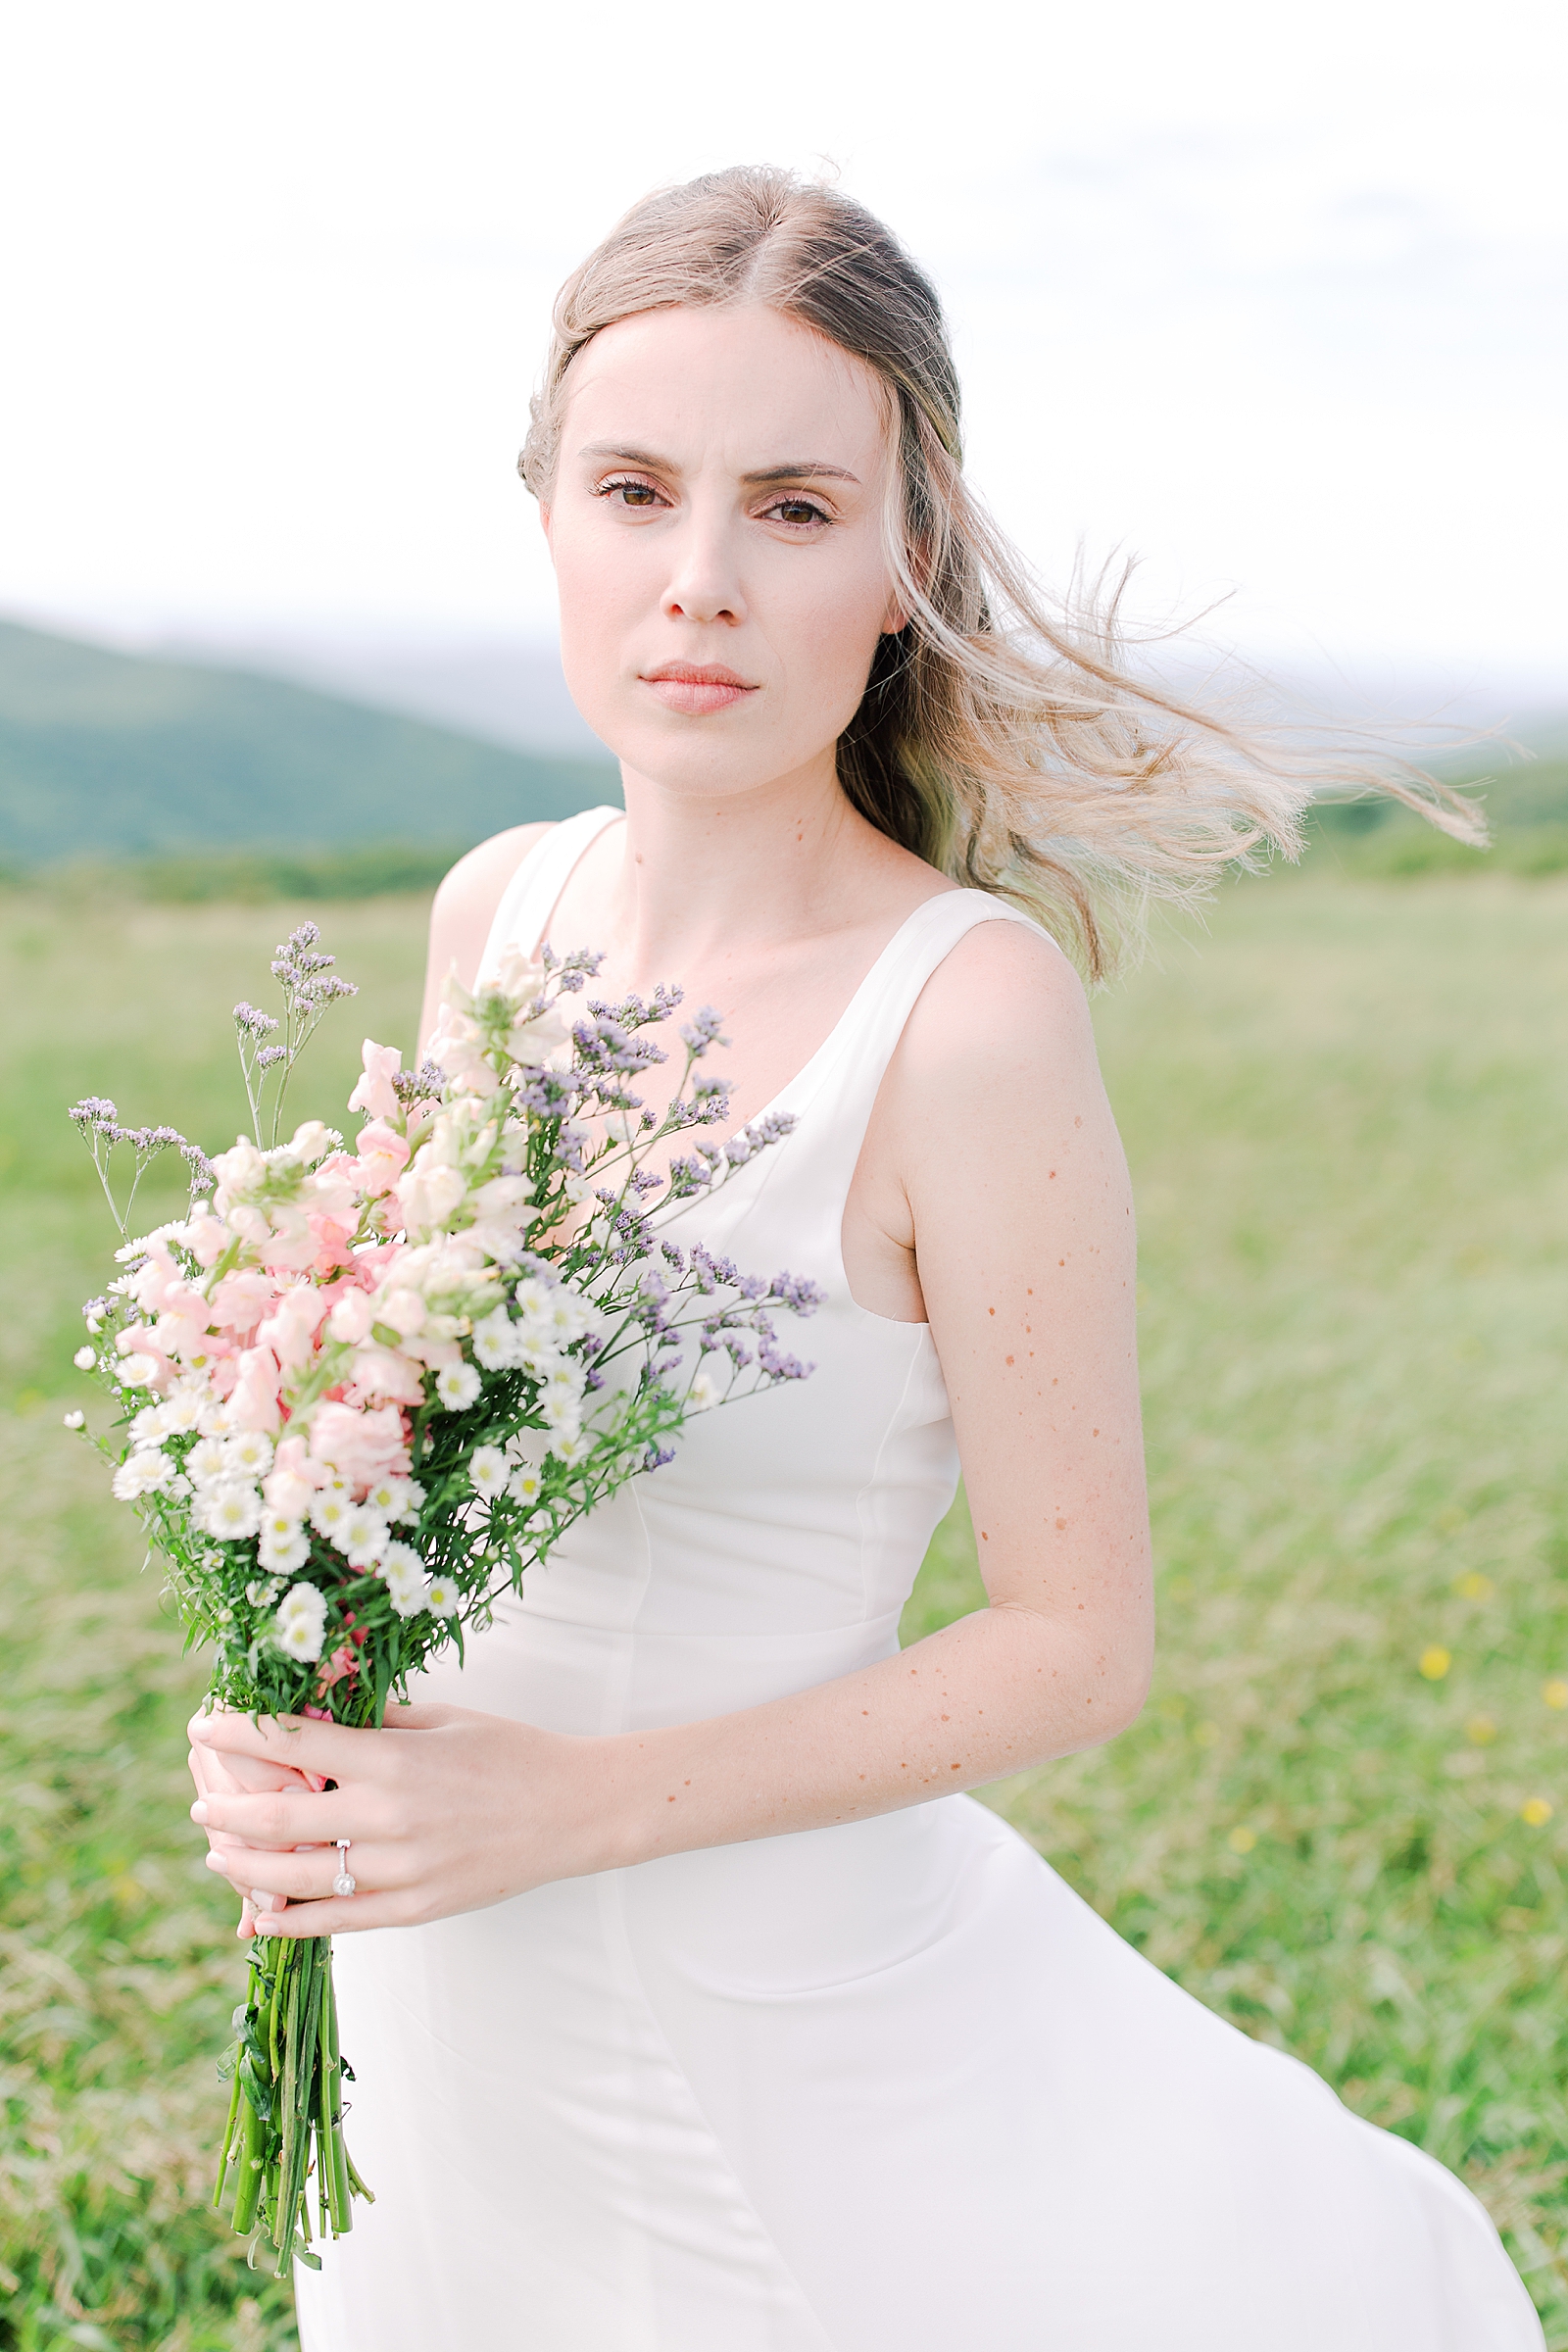 Max Patch Elopement Bride Looking at Camera with Wind Blowing In Her Hair Photo